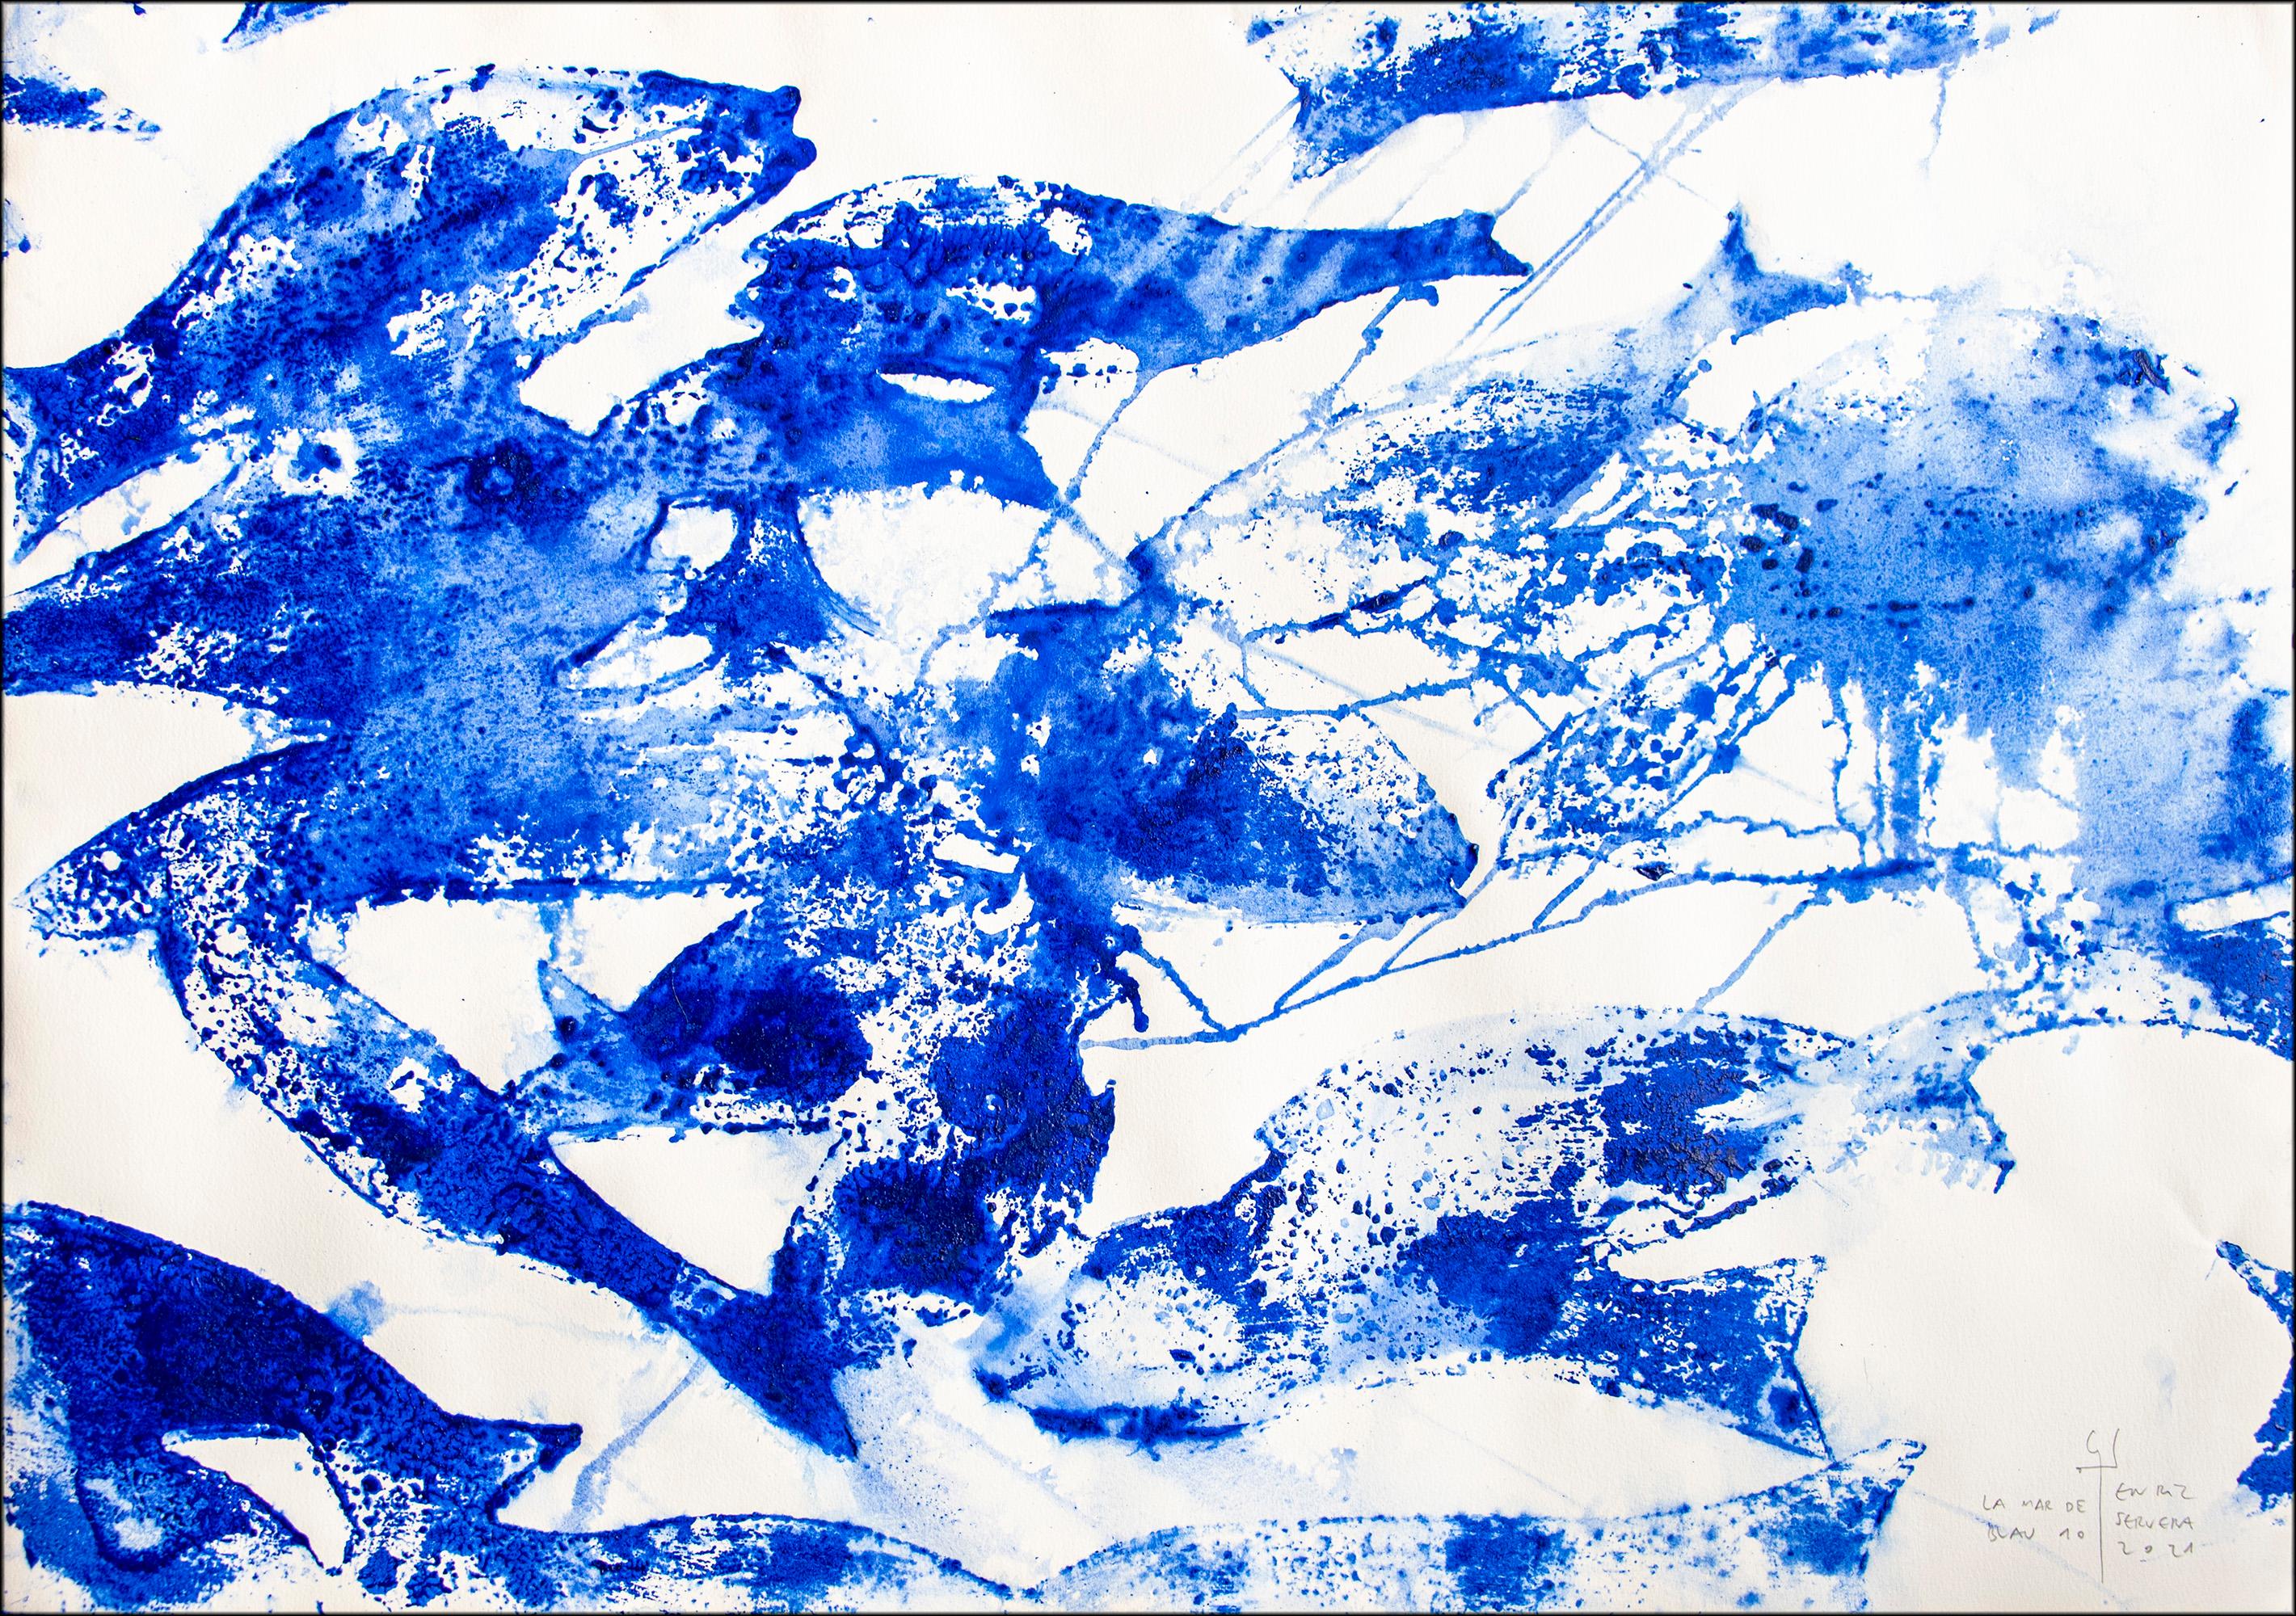 Enric Servera Animal Painting - Sea of Blues N10, Abstract Blue and White Fish Patterns, Mediterranean Style 